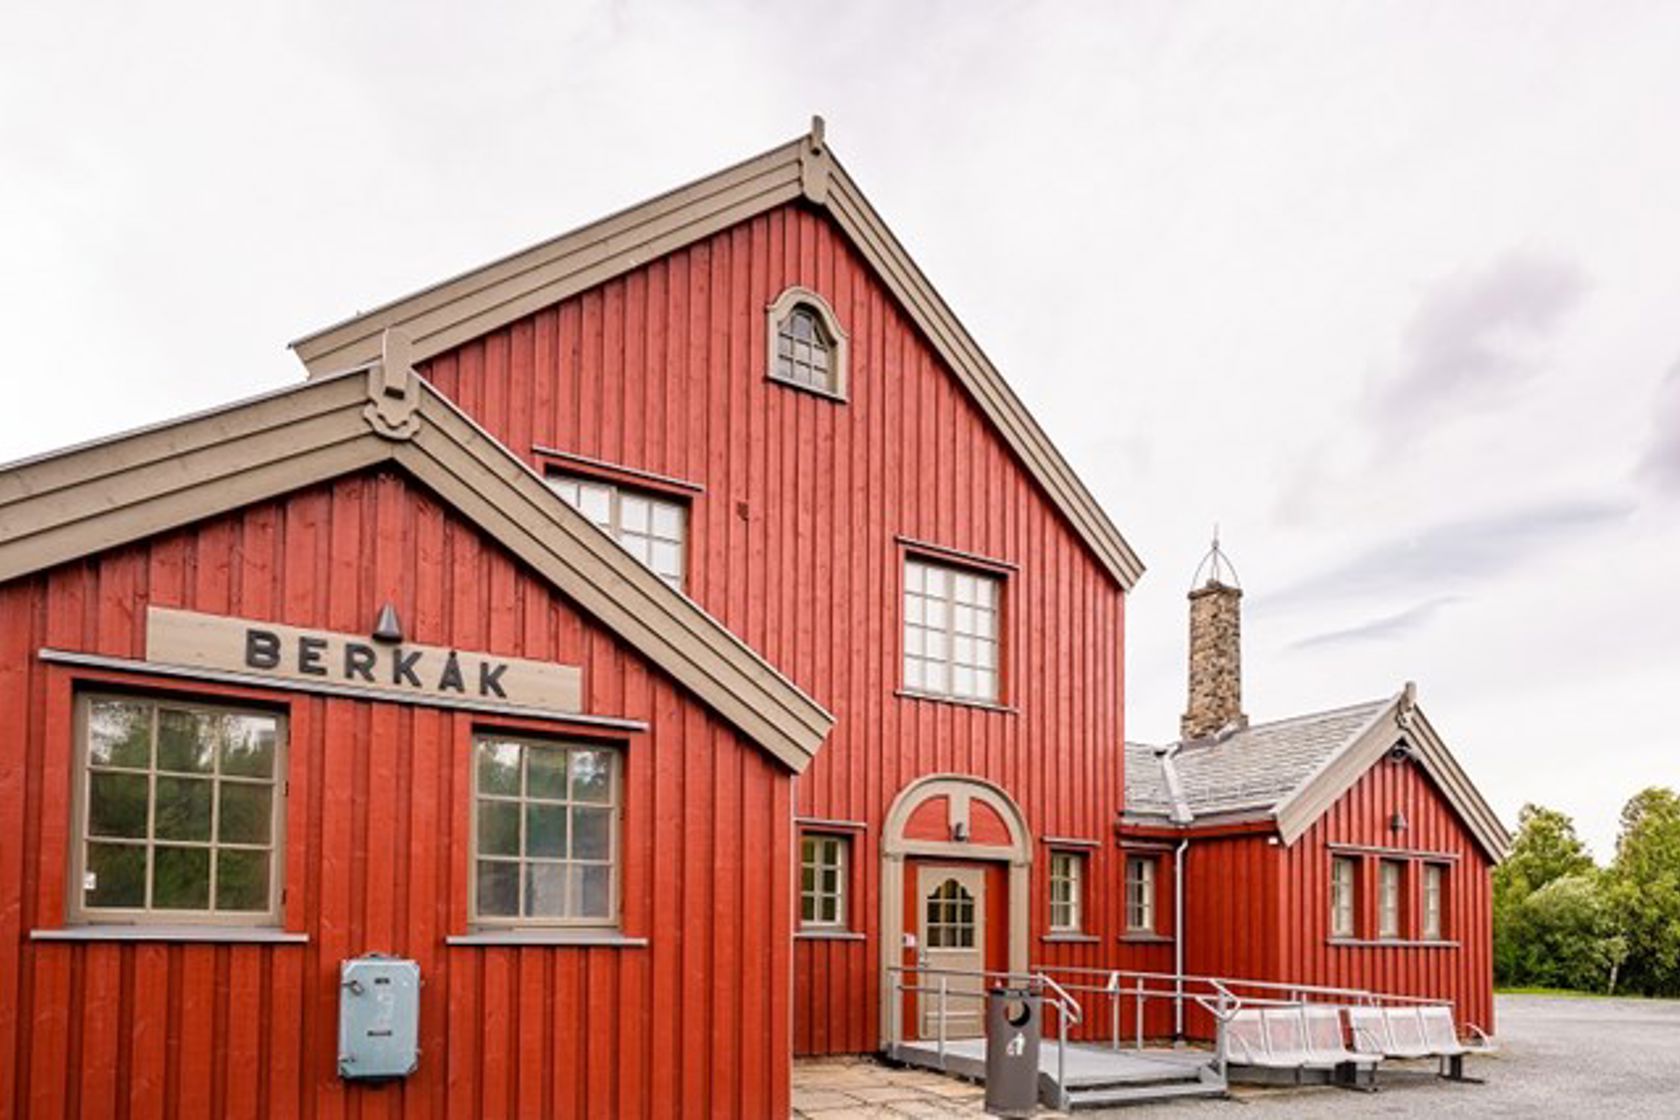 Exterior view of Berkåk station which opened in 1921